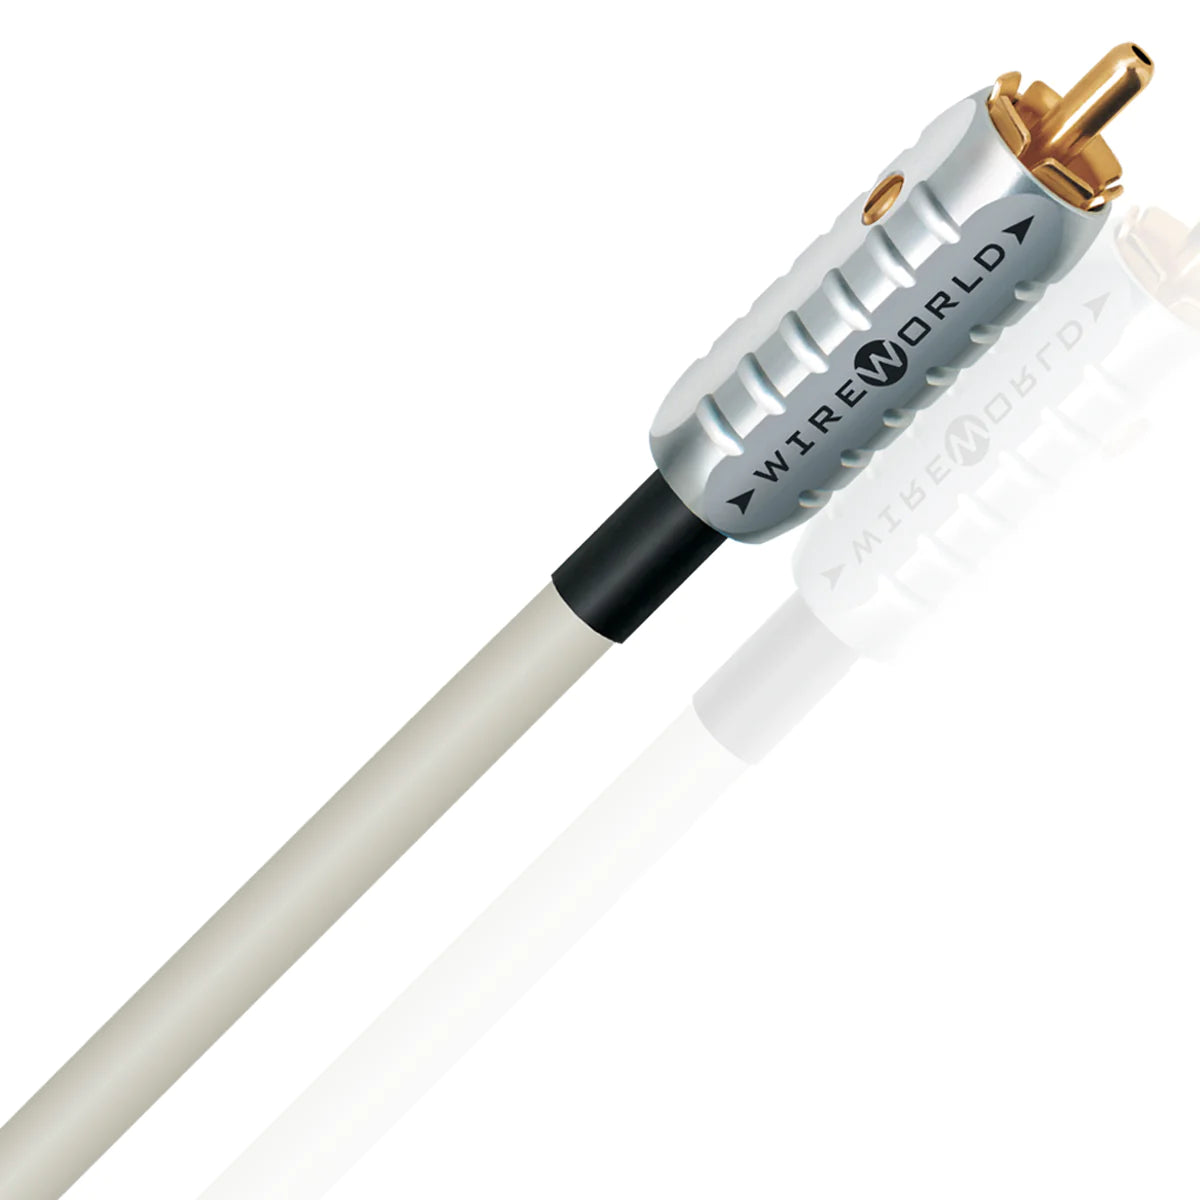 WireWorld Solstice 8 Subwoofer Cable